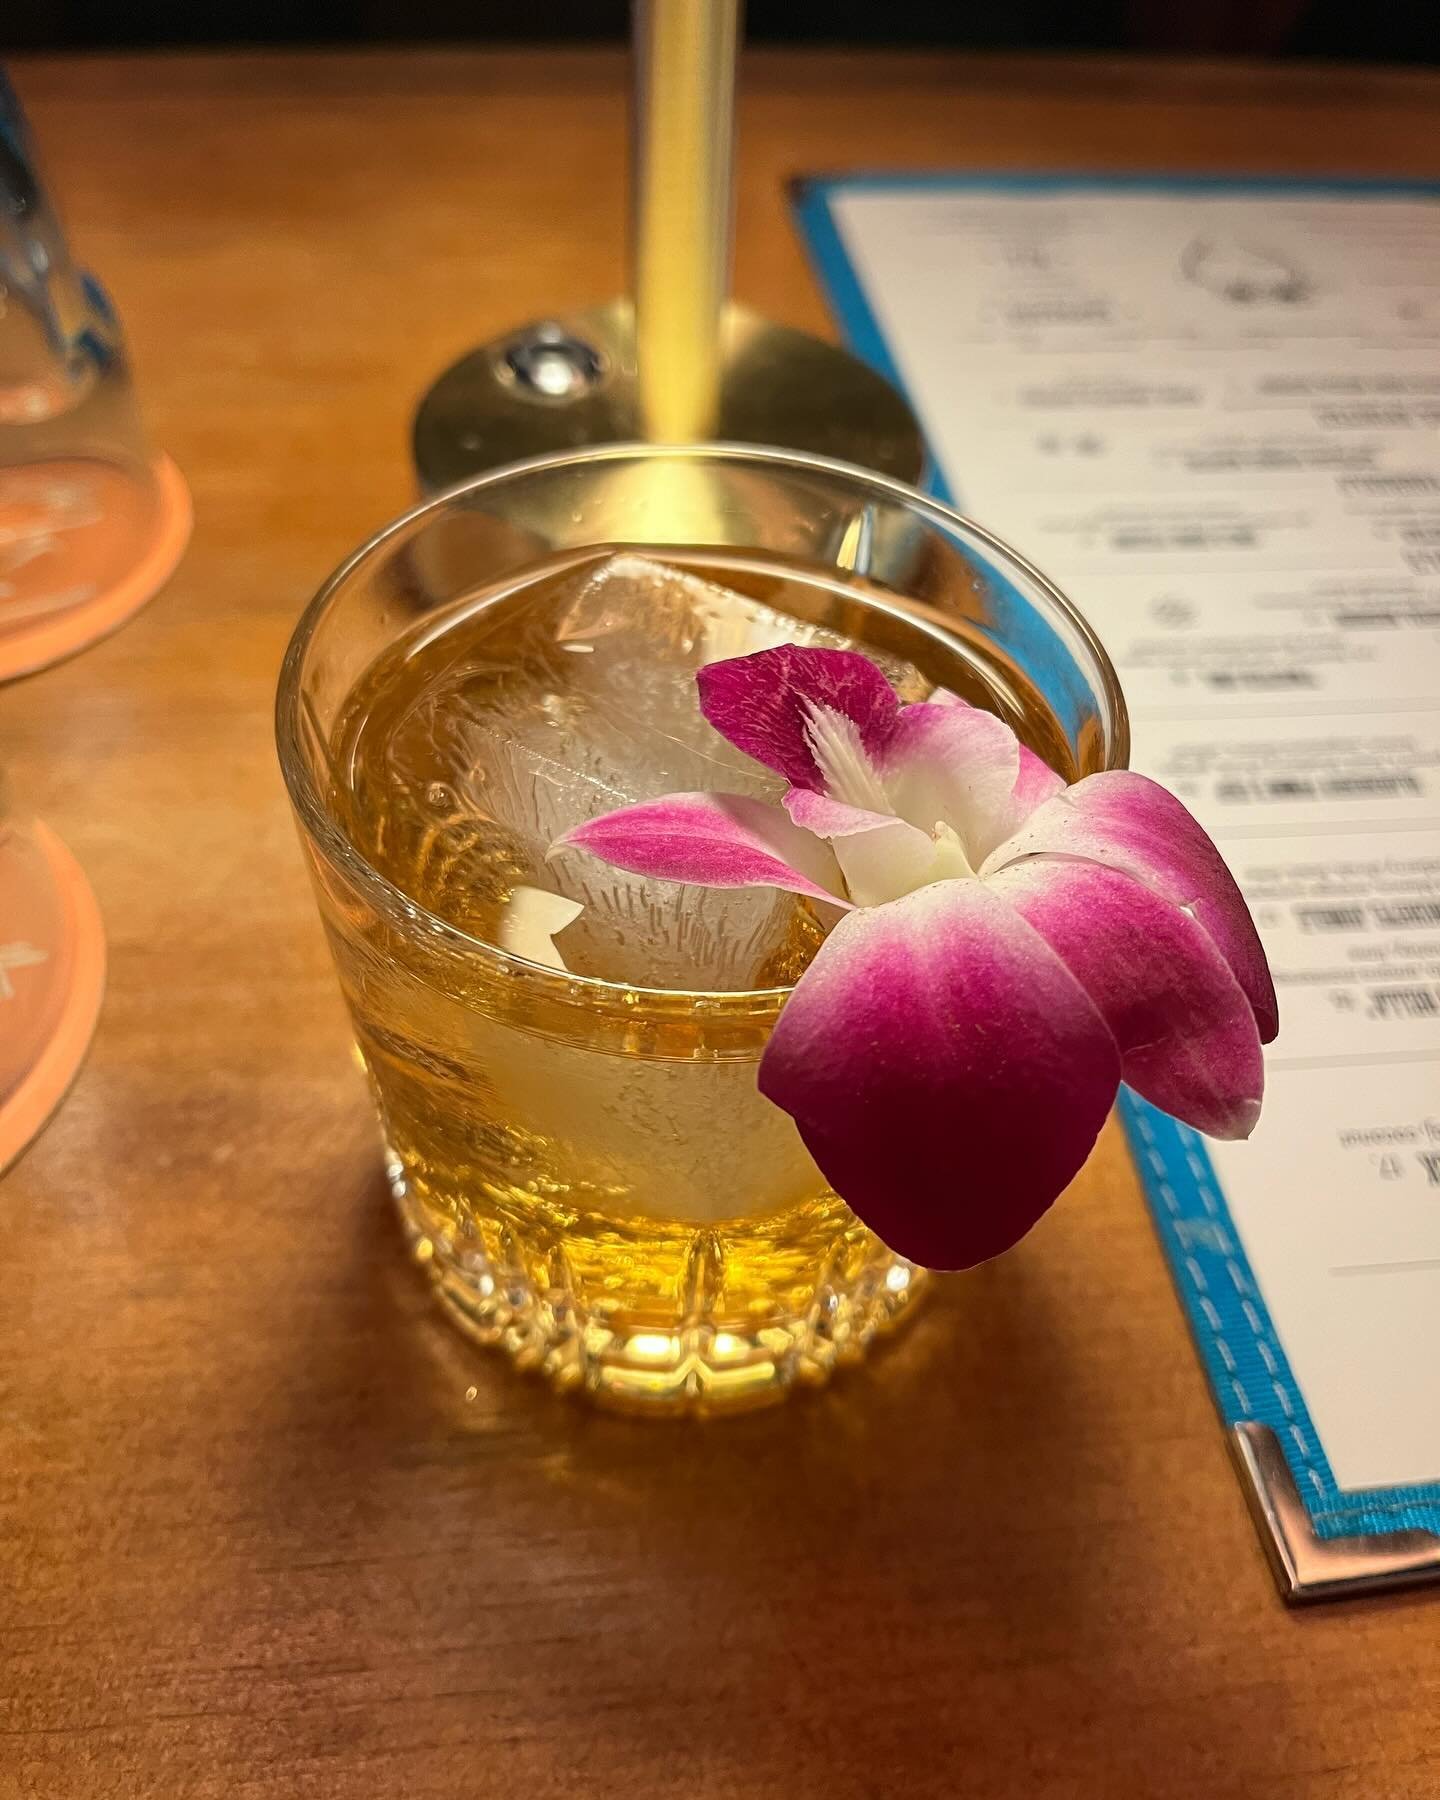 &ldquo;He was a good little [drink] and always very curious&rdquo; - Curious George 
.
.
.
Have you tried our curious George? It&rsquo;s the perfect bourbon drink with a banana twist 🙈